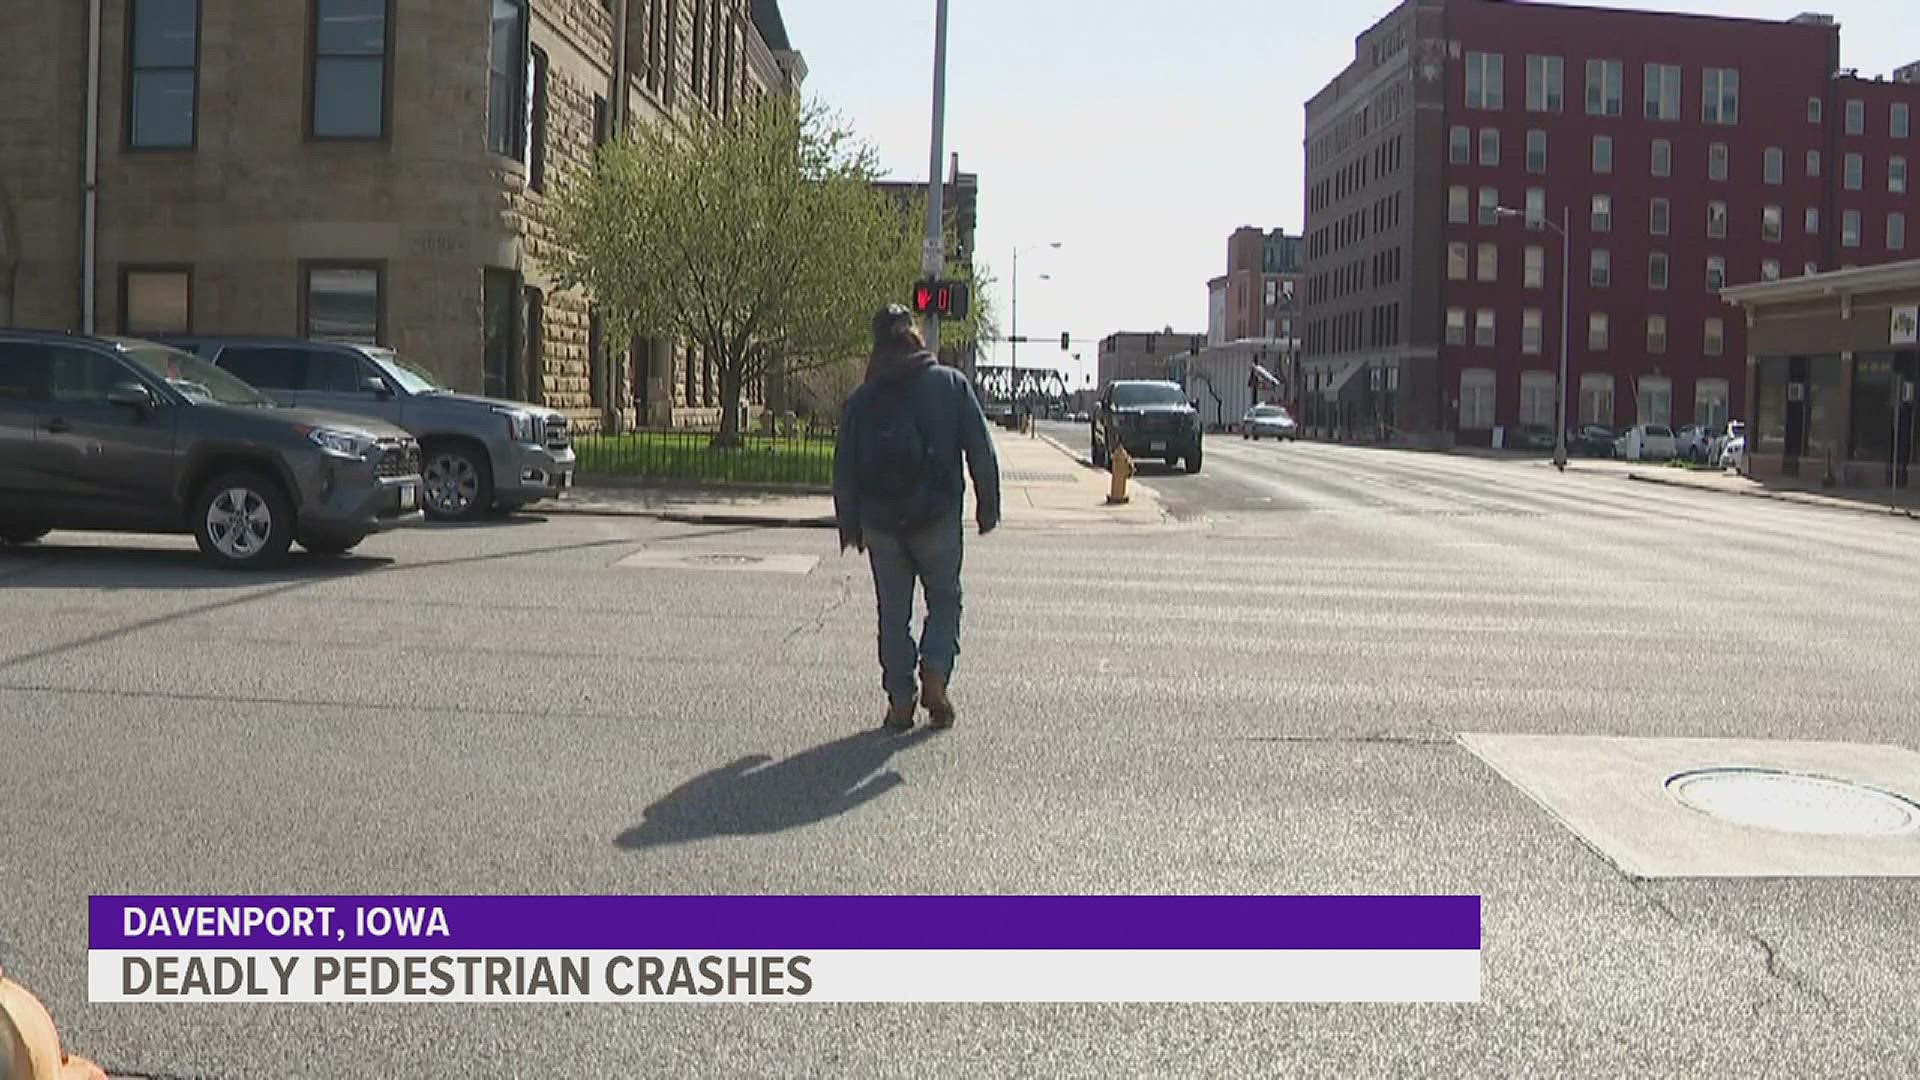 In a release detailing safety tips and 2021 crash data, DPD stressed the importance of considering pedestrian safety in mind when behind the wheel or on the streets.